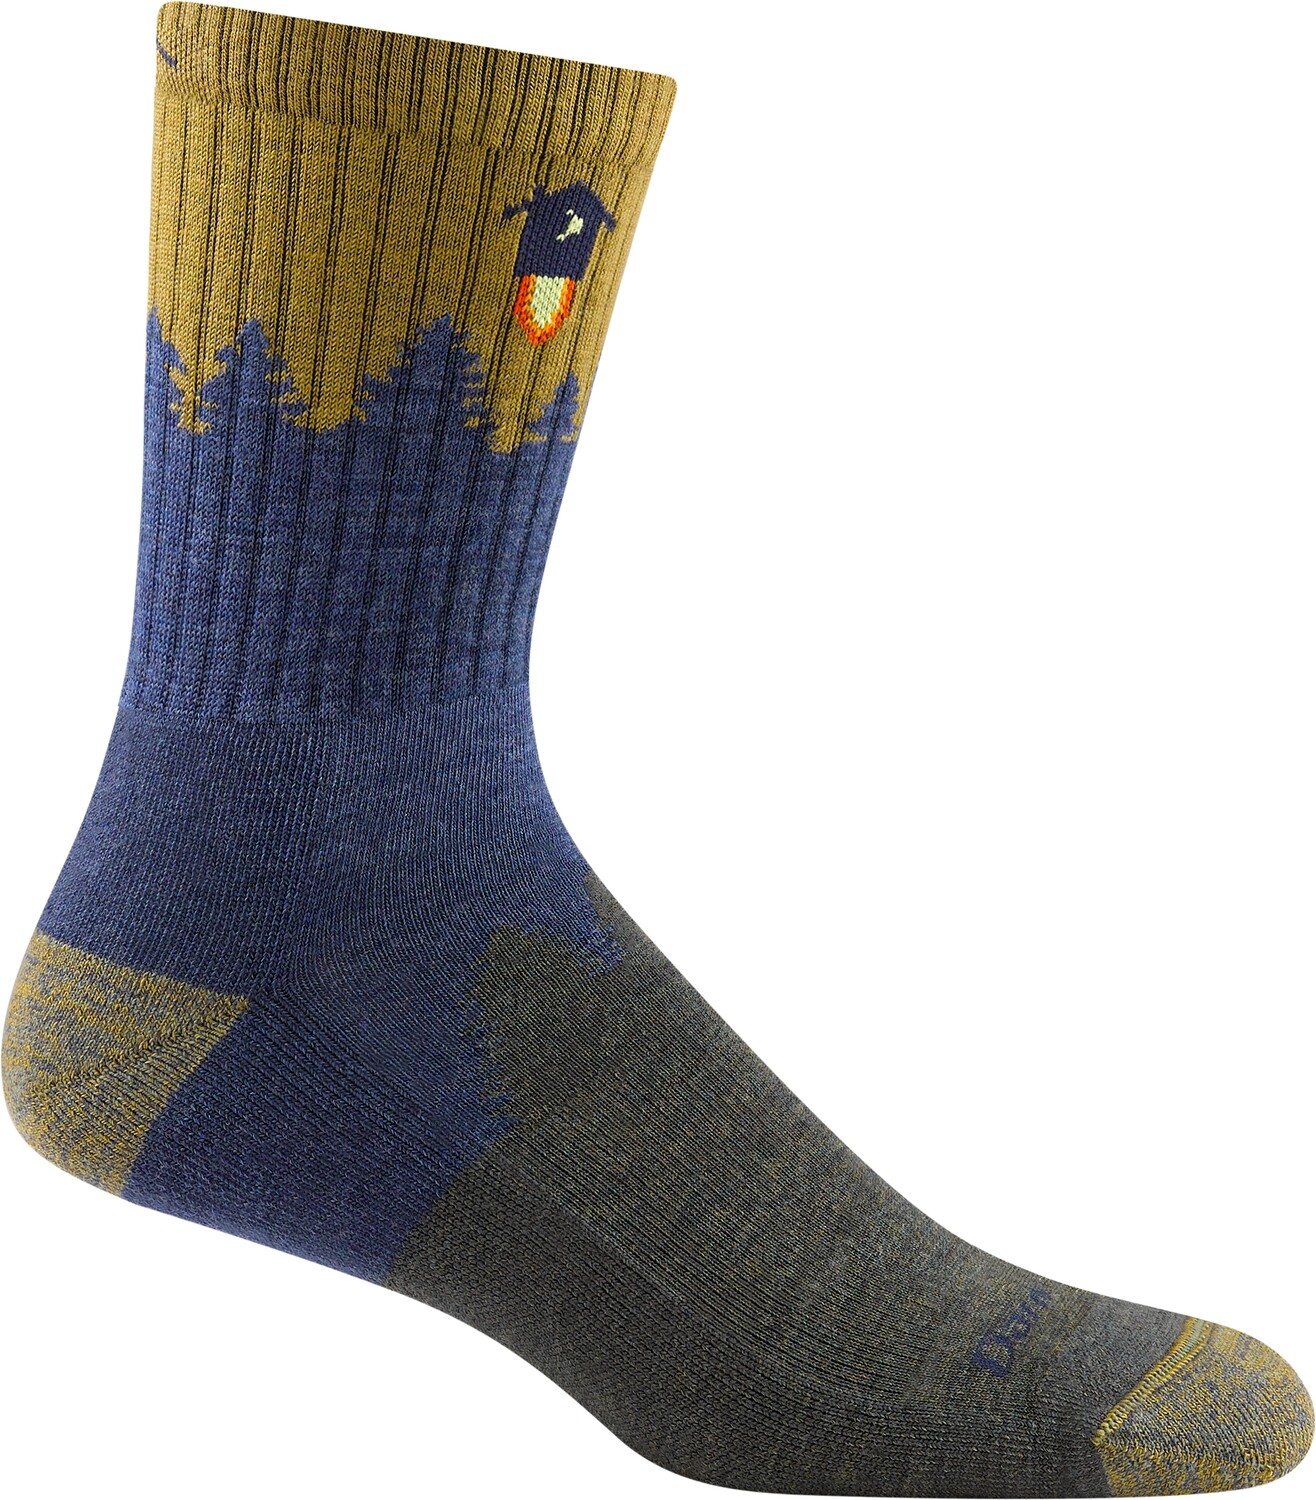 Men's/Unisex 1974 Number 2 Micro Crew Midweight Cushion Hiking Sock